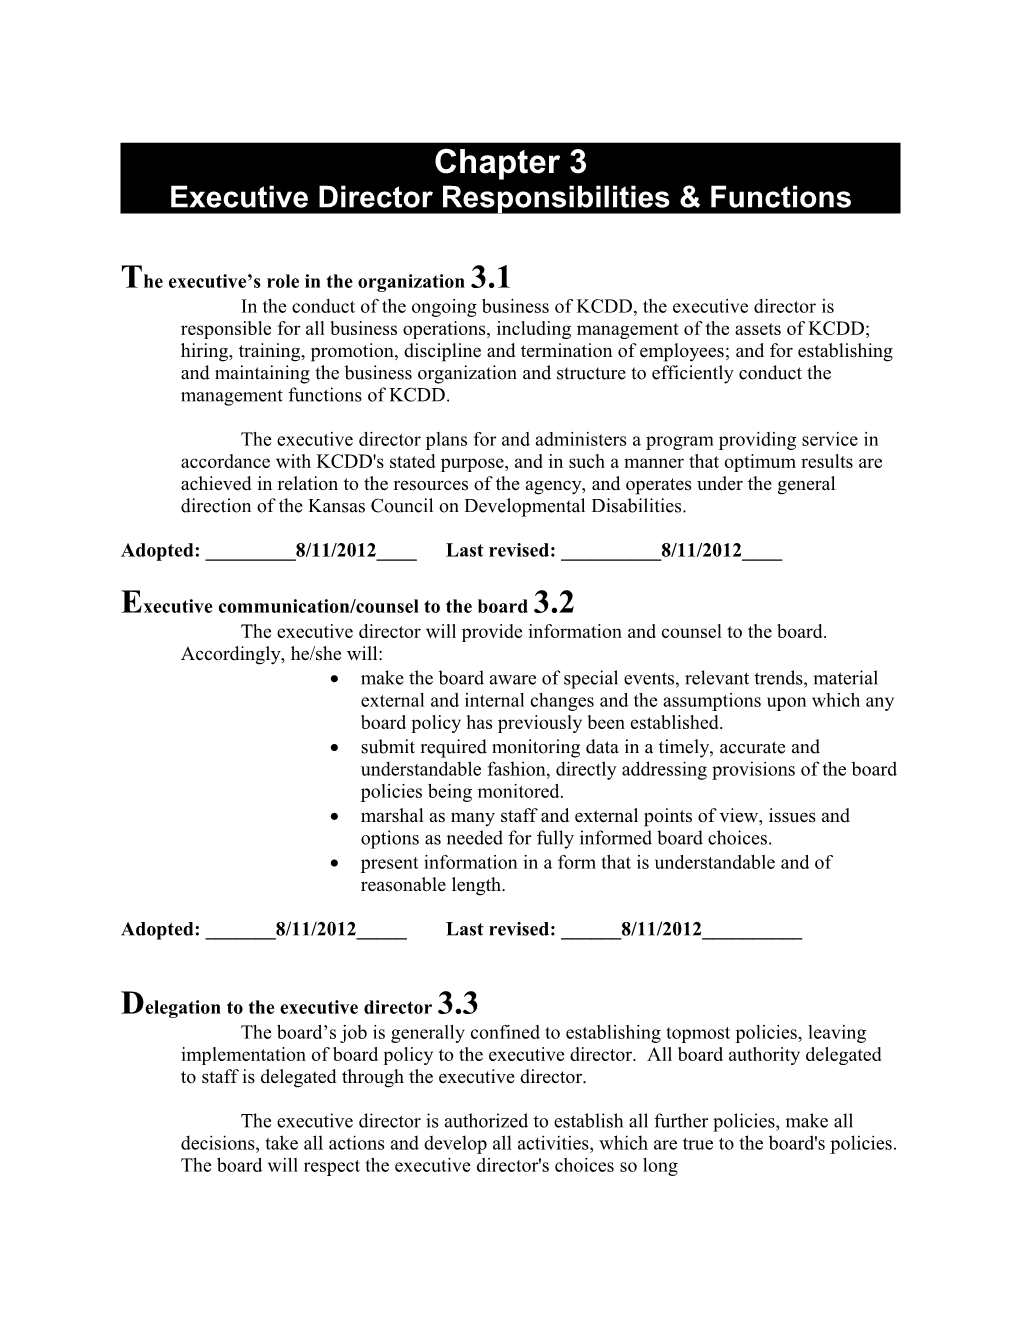 Executive Director Responsibilities And Functions